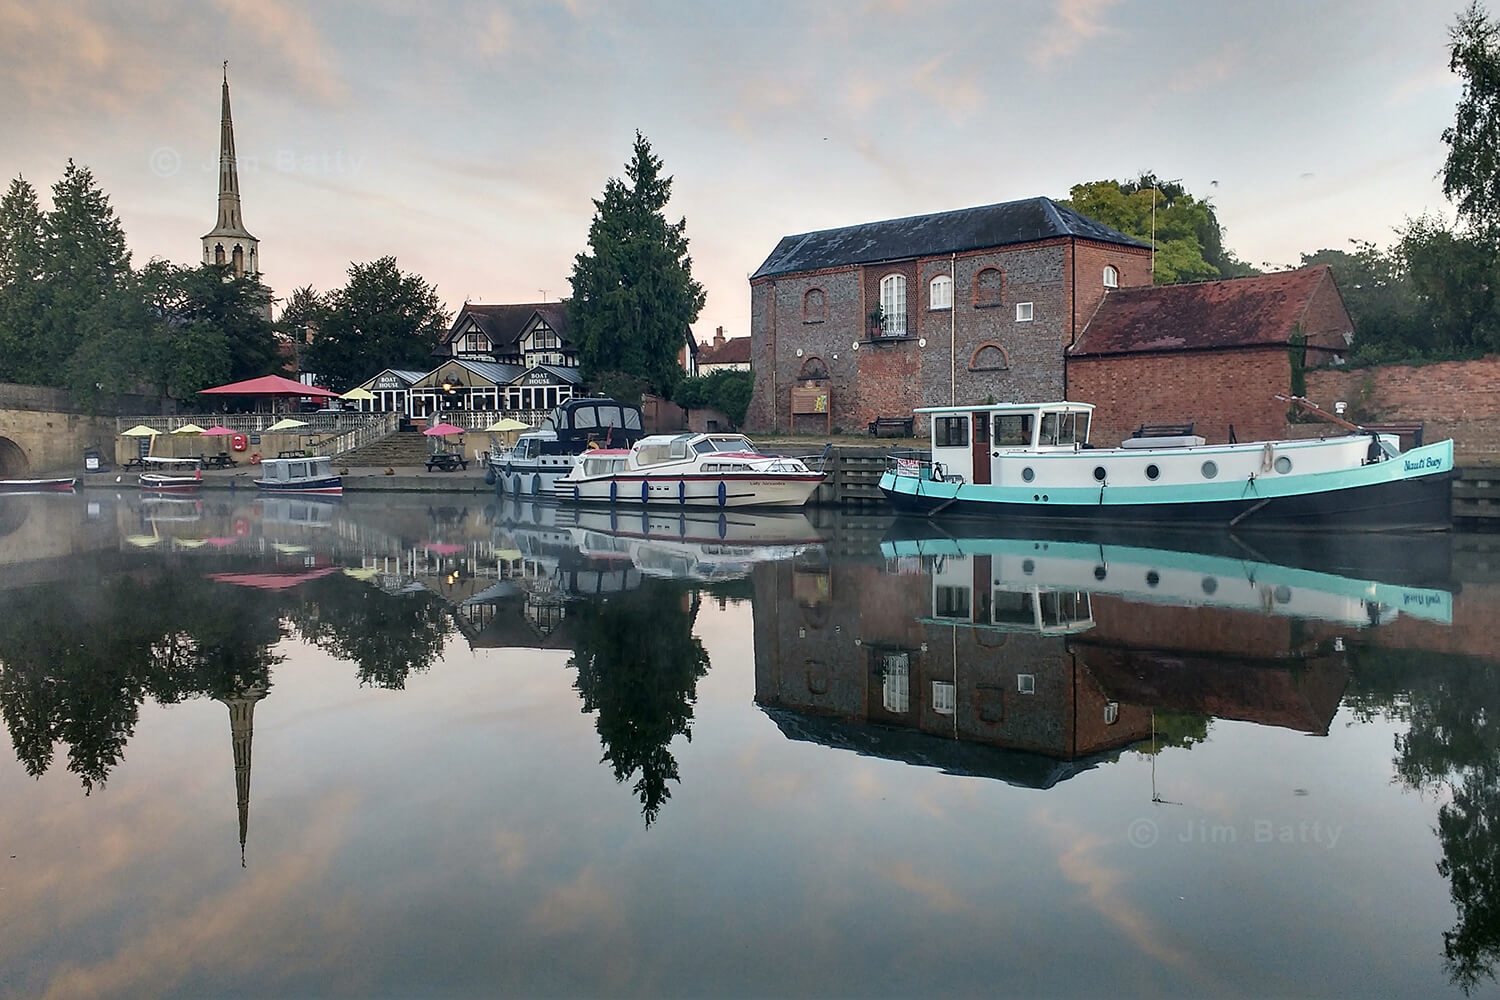 A Dutch barge, cruisers and small day boats moored on the River Thames at Wallingford